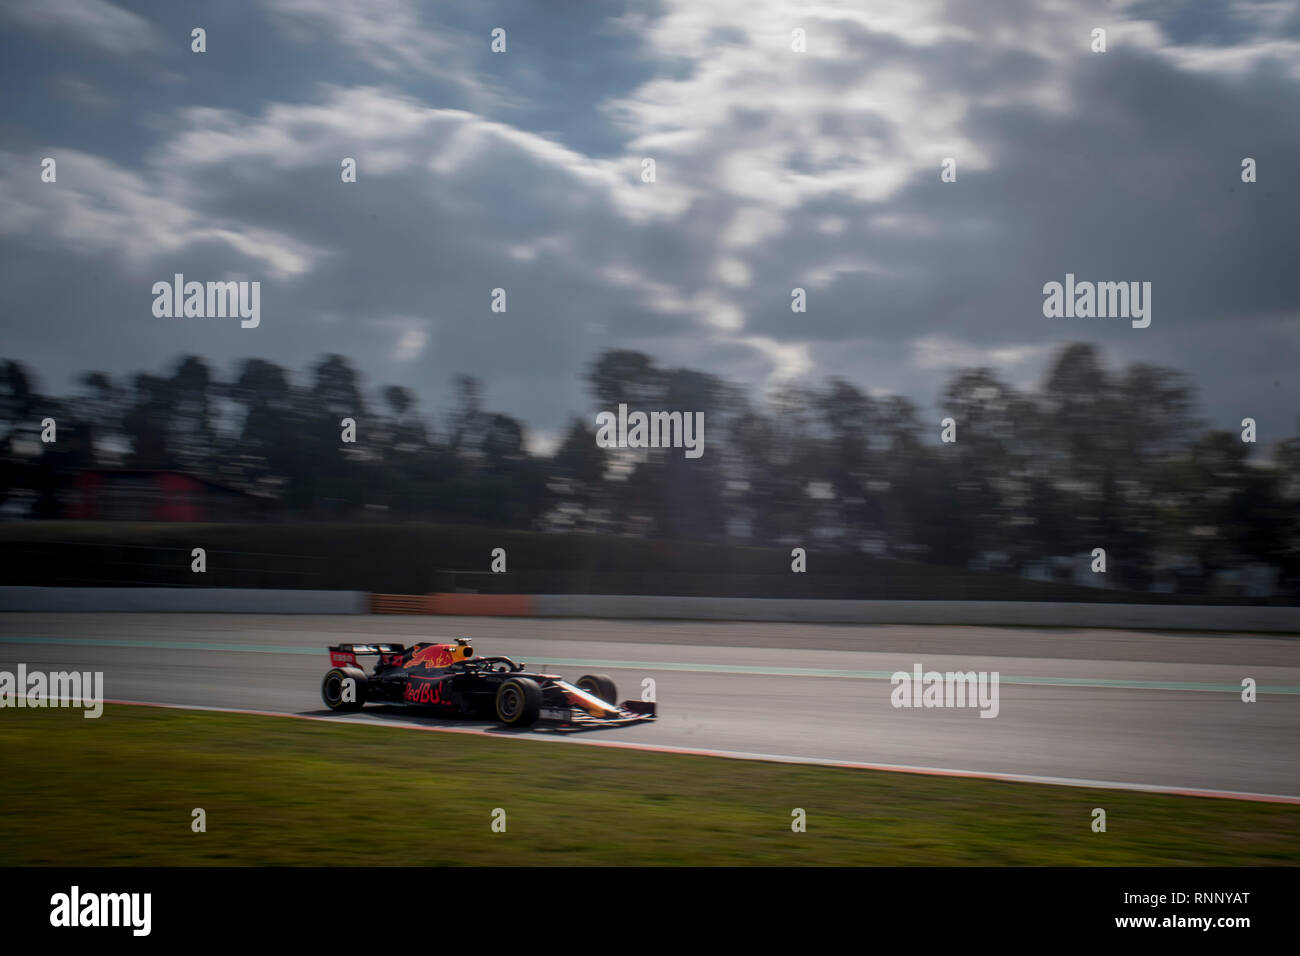 Barcelona, Spain. 19th Feb, 2019. Pierre Gasly of the Aston Martin Red Bull Racing team  at the Circuit de Catalunya in Montmelo (Barcelona province) during the pre-season testing session. Credit:  Jordi Boixareu/Alamy Live News Stock Photo